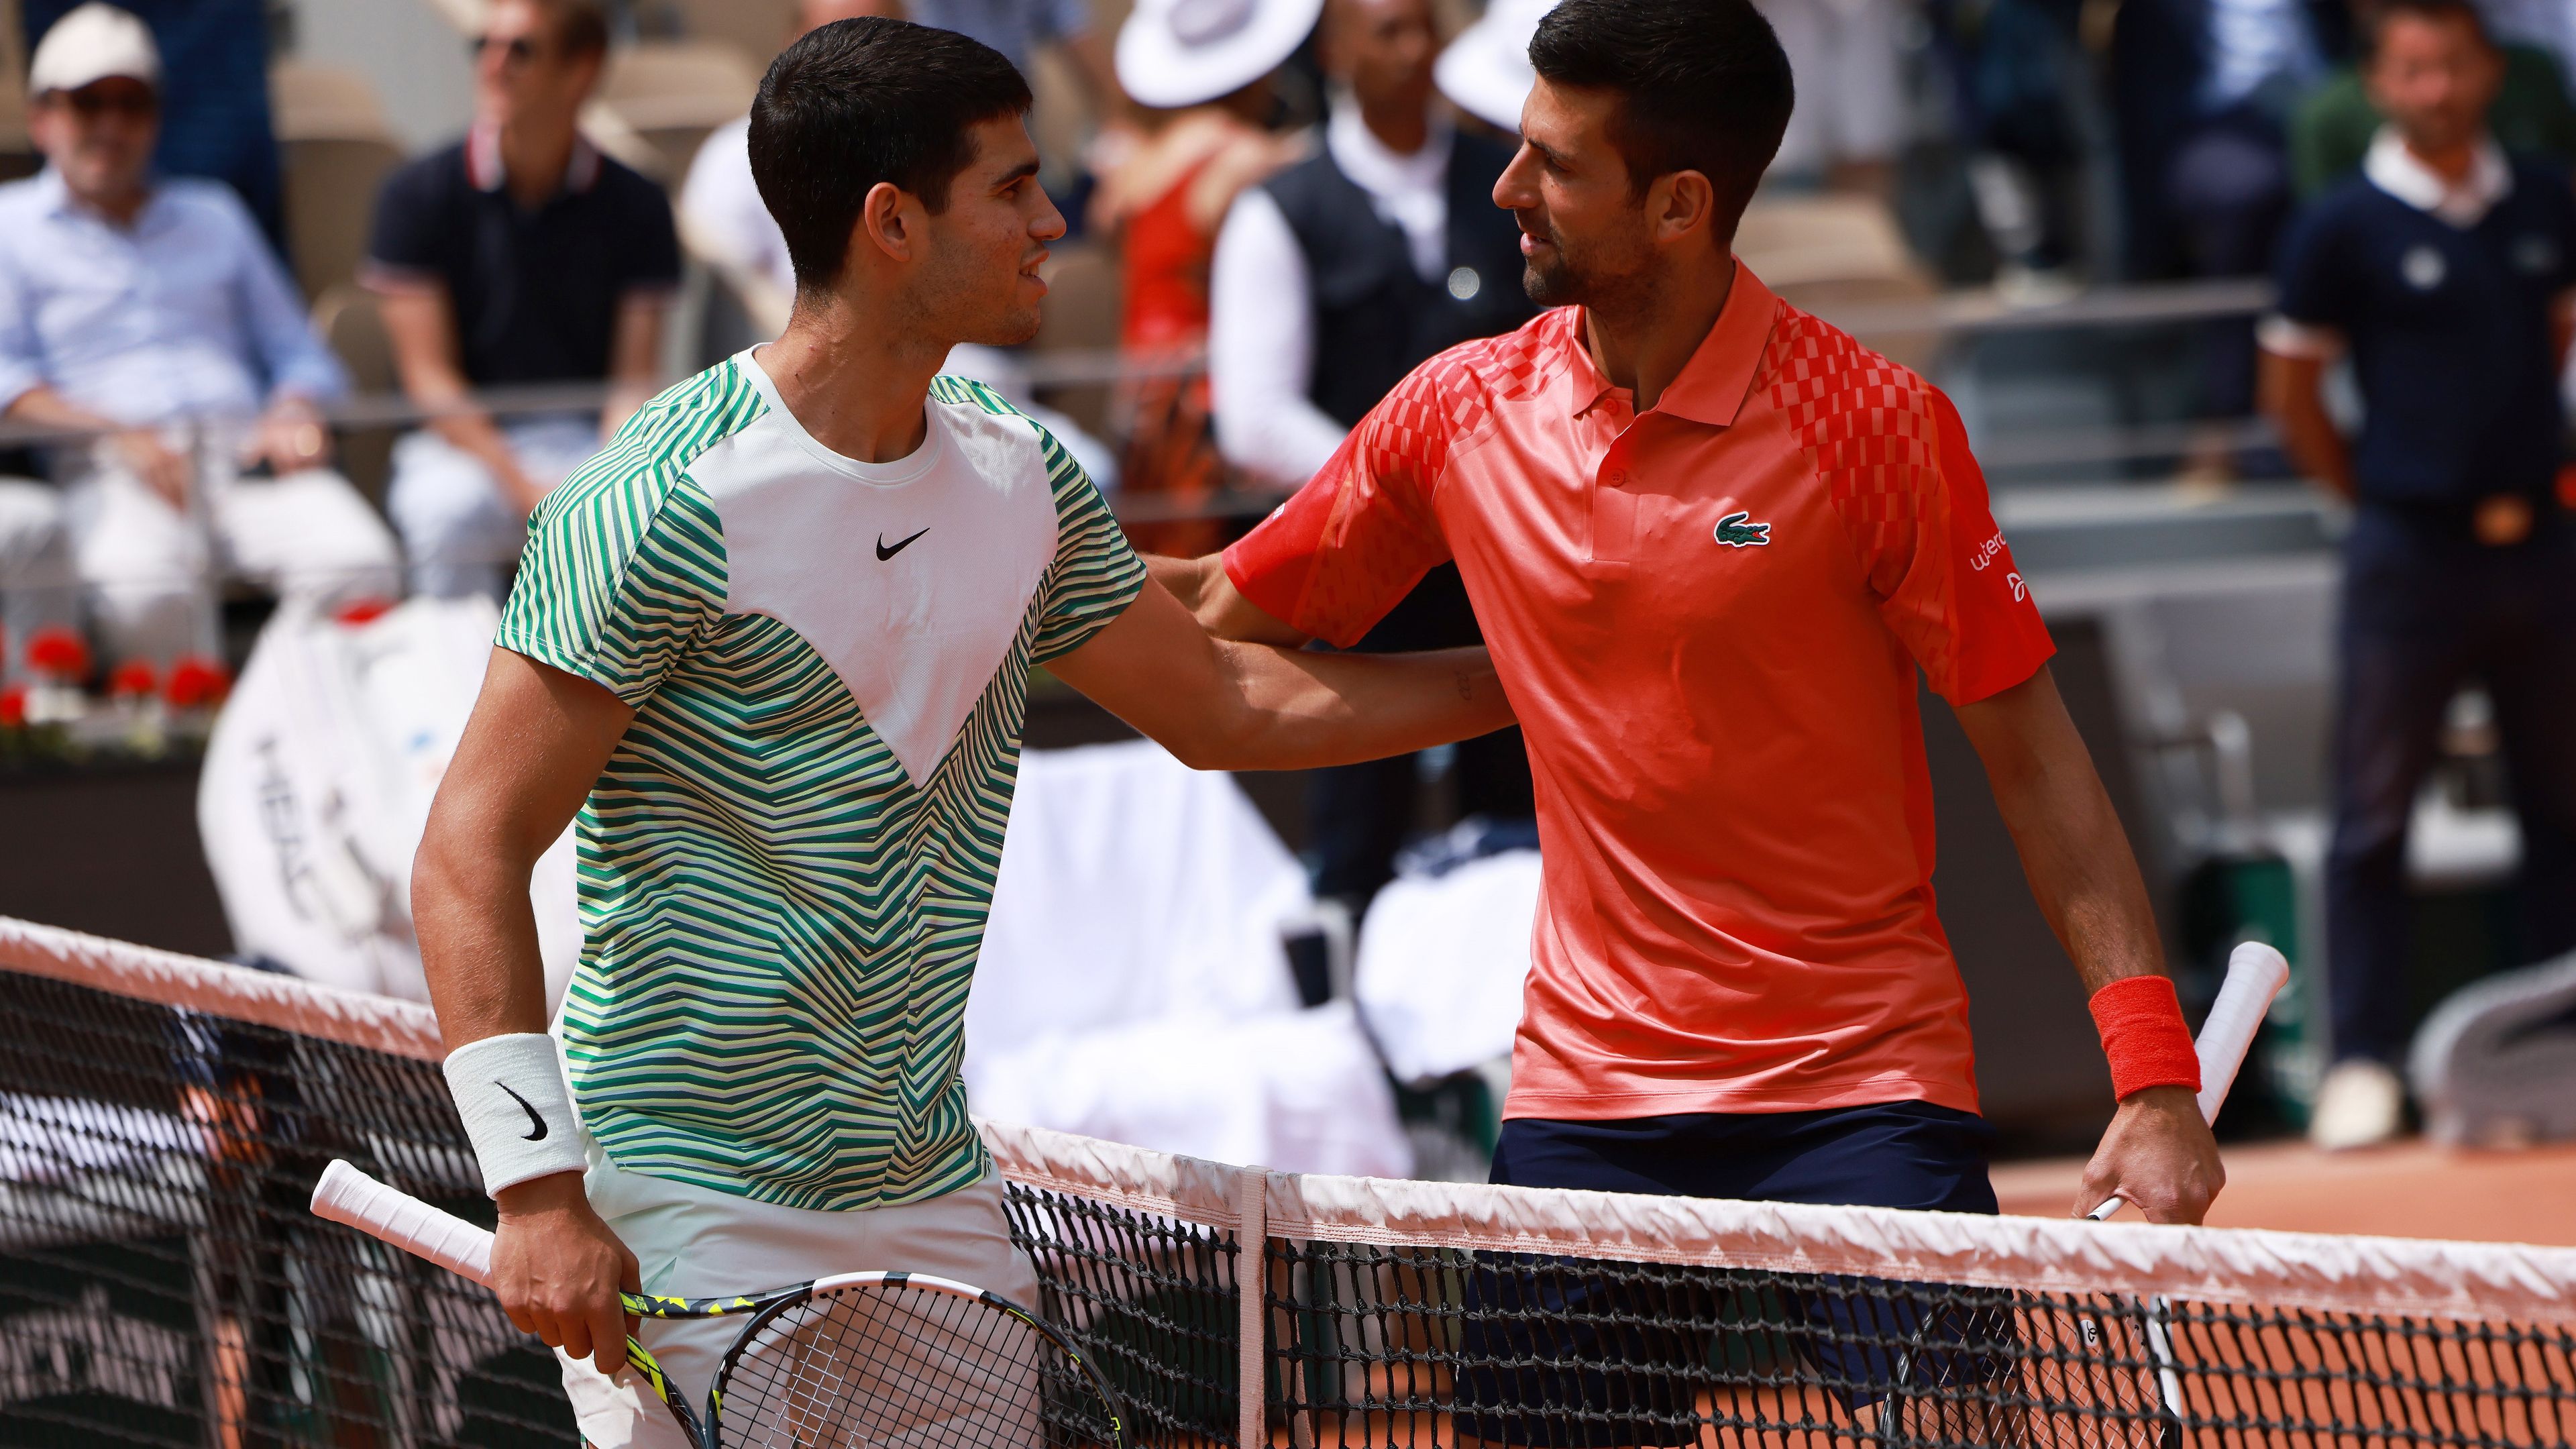 Novak Djokovic R of Serbia greets Carlos Alcaraz of Spain prior to the men&#x27;s singles semifinals between Novak Djokovic of Serbia and Carlos Alcaraz of Spain at the French Open tennis tournament at Roland Garros in Paris, France, June 9, 2023. (Photo by Gao Jing/Xinhua via Getty Images)